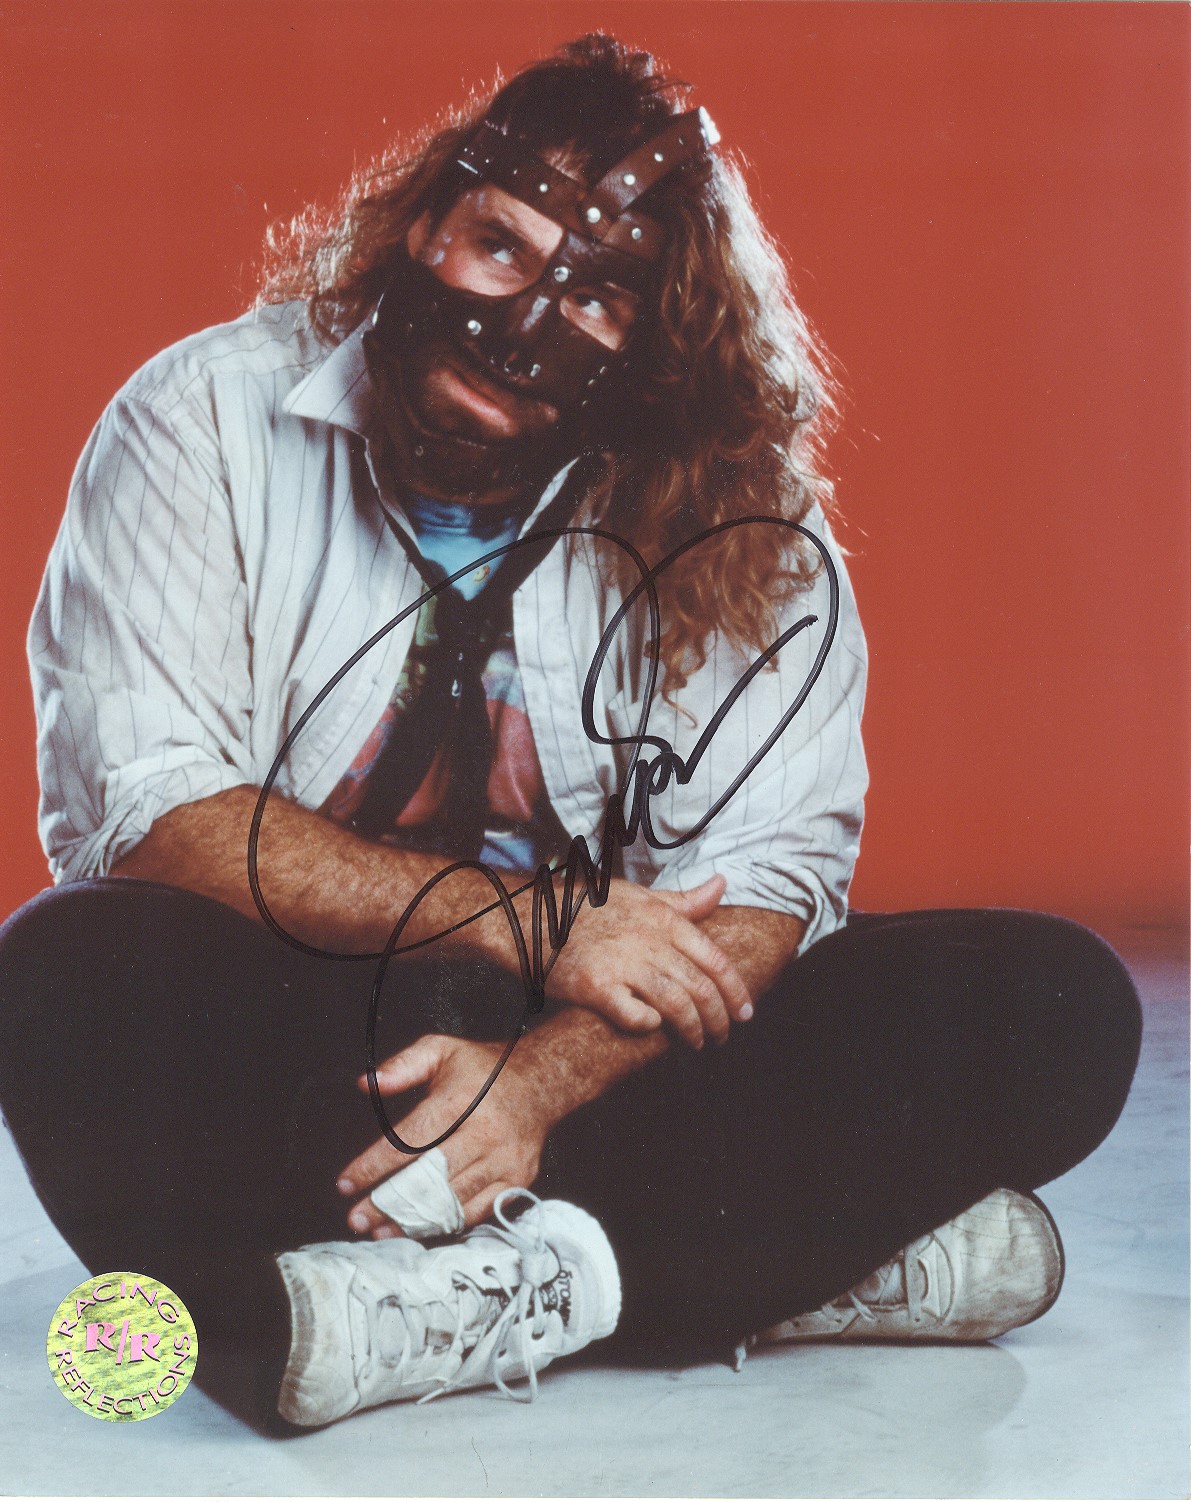 Mick Foley Image Mankind Photo HD Wallpaper And